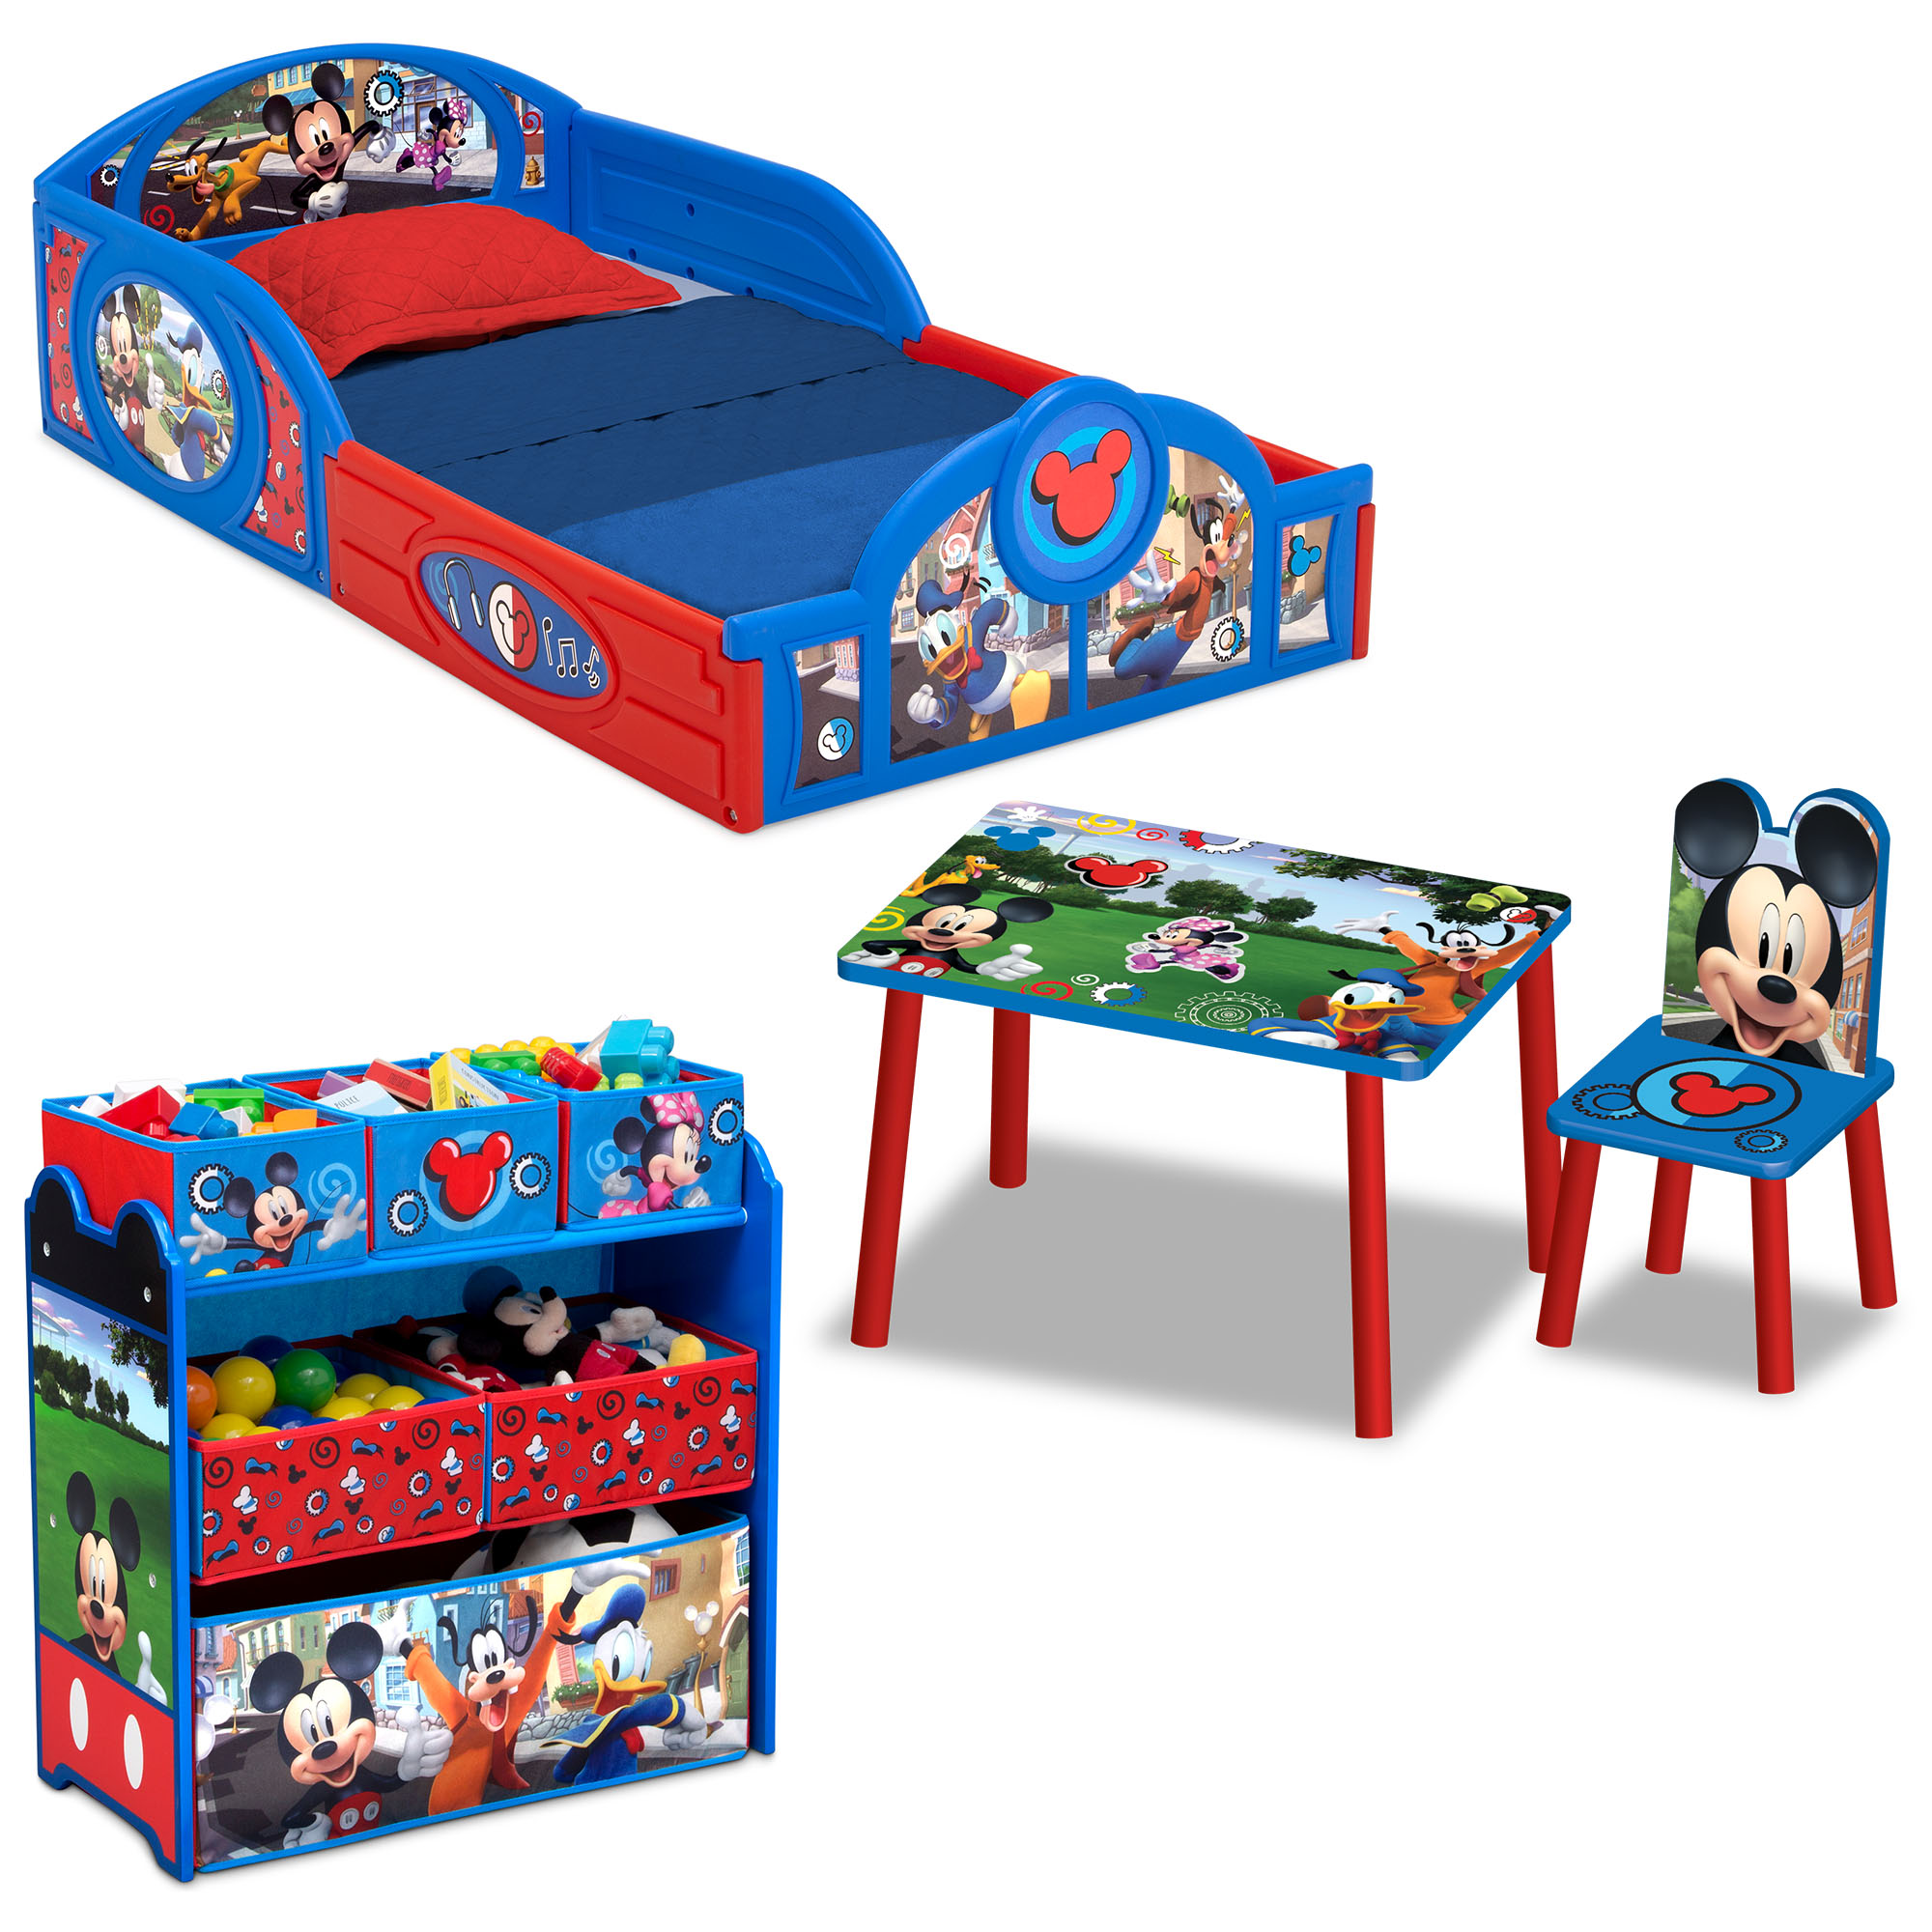 Disney Mickey Mouse 4-Piece Room-in-a-Box - Toddler Bedroom Set - image 1 of 20